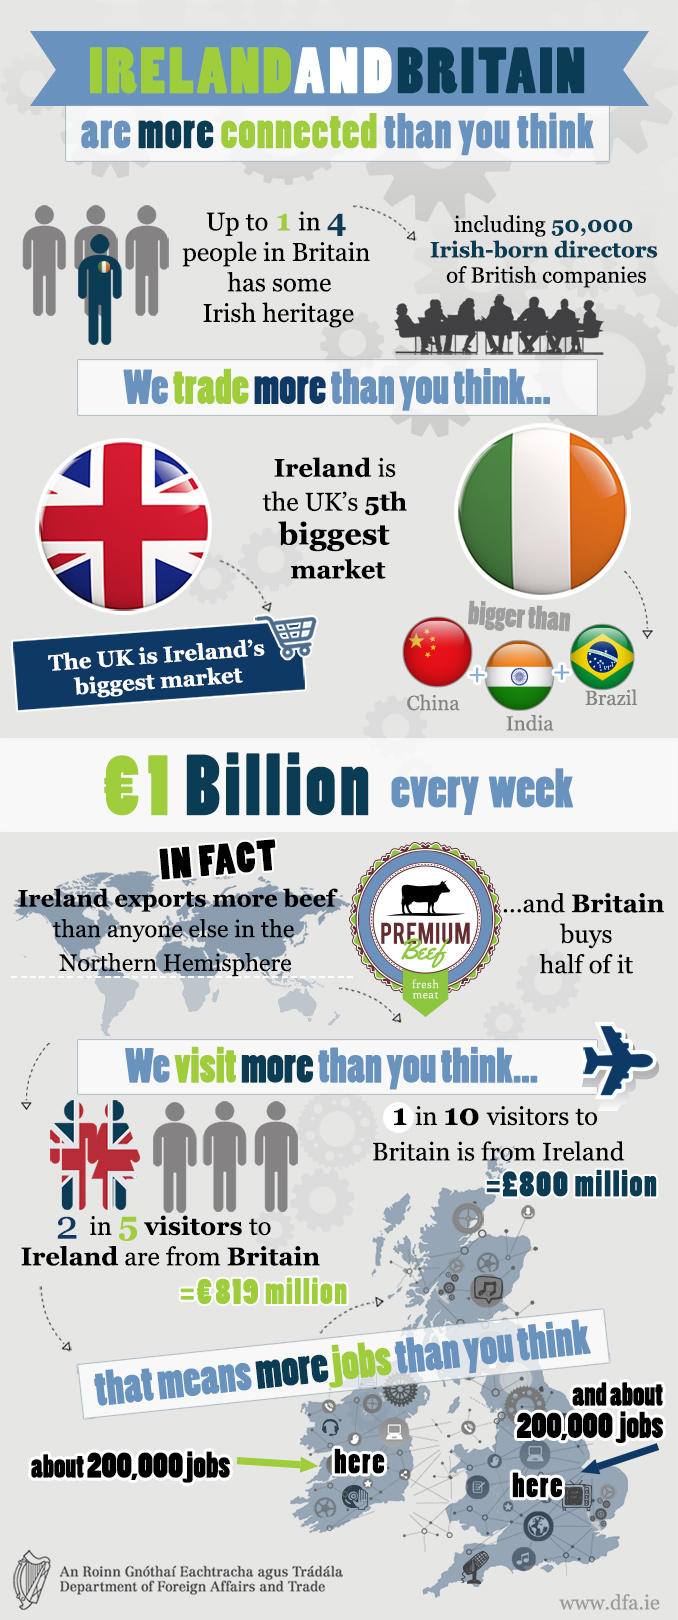 Ireland and Britain are more connected than you think.